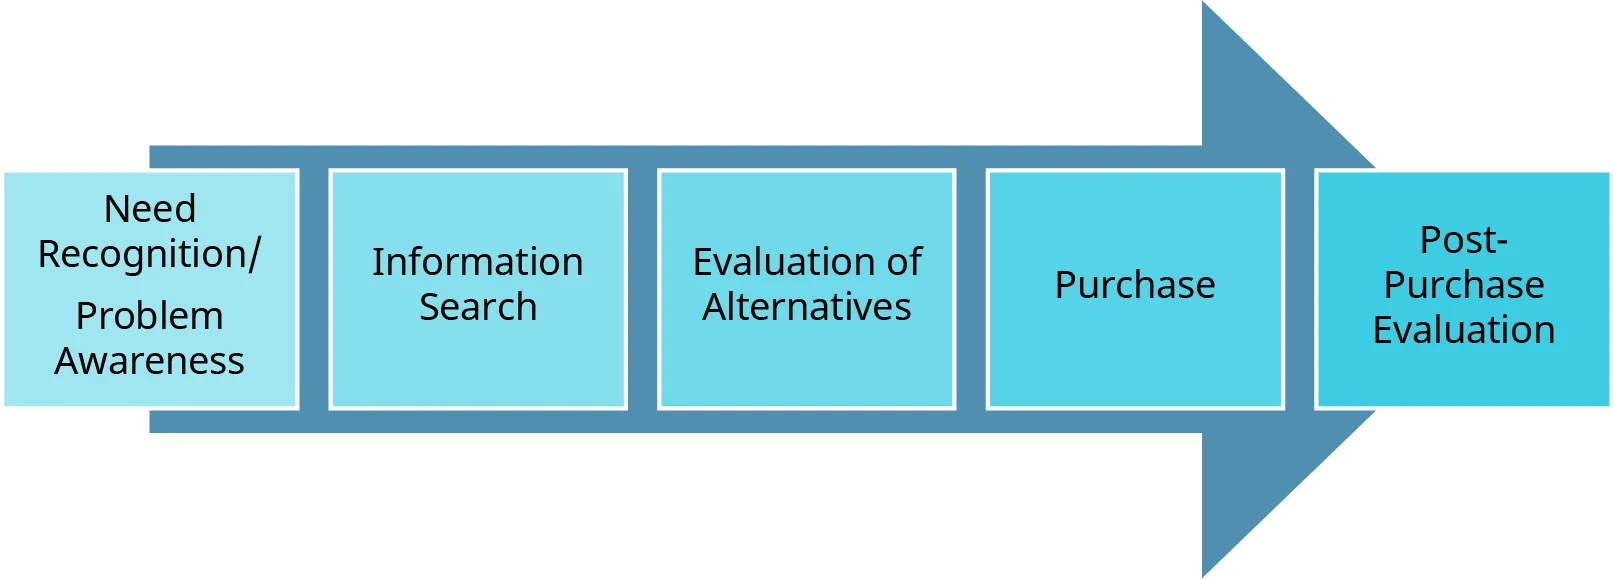 The five stages of the consumer decision-making process are overlayed on an arrow pointing to the right. Starting at the left, those stages are: need recognition or problem awareness, information search, evaluation of alternatives, purchase, and post-purchase evaluation.